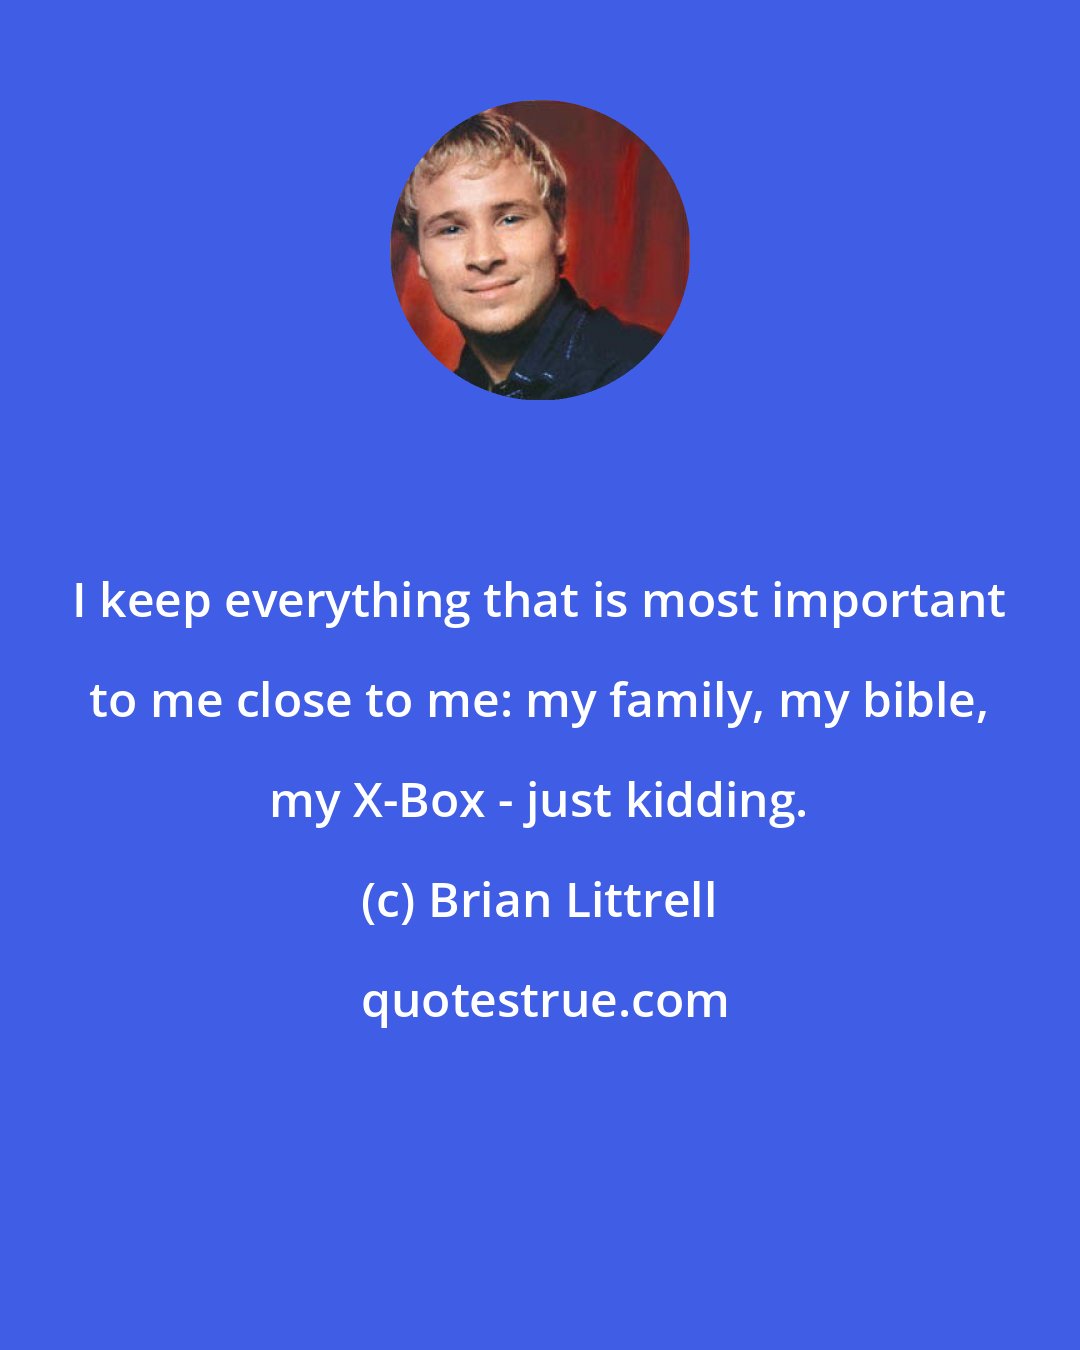 Brian Littrell: I keep everything that is most important to me close to me: my family, my bible, my X-Box - just kidding.